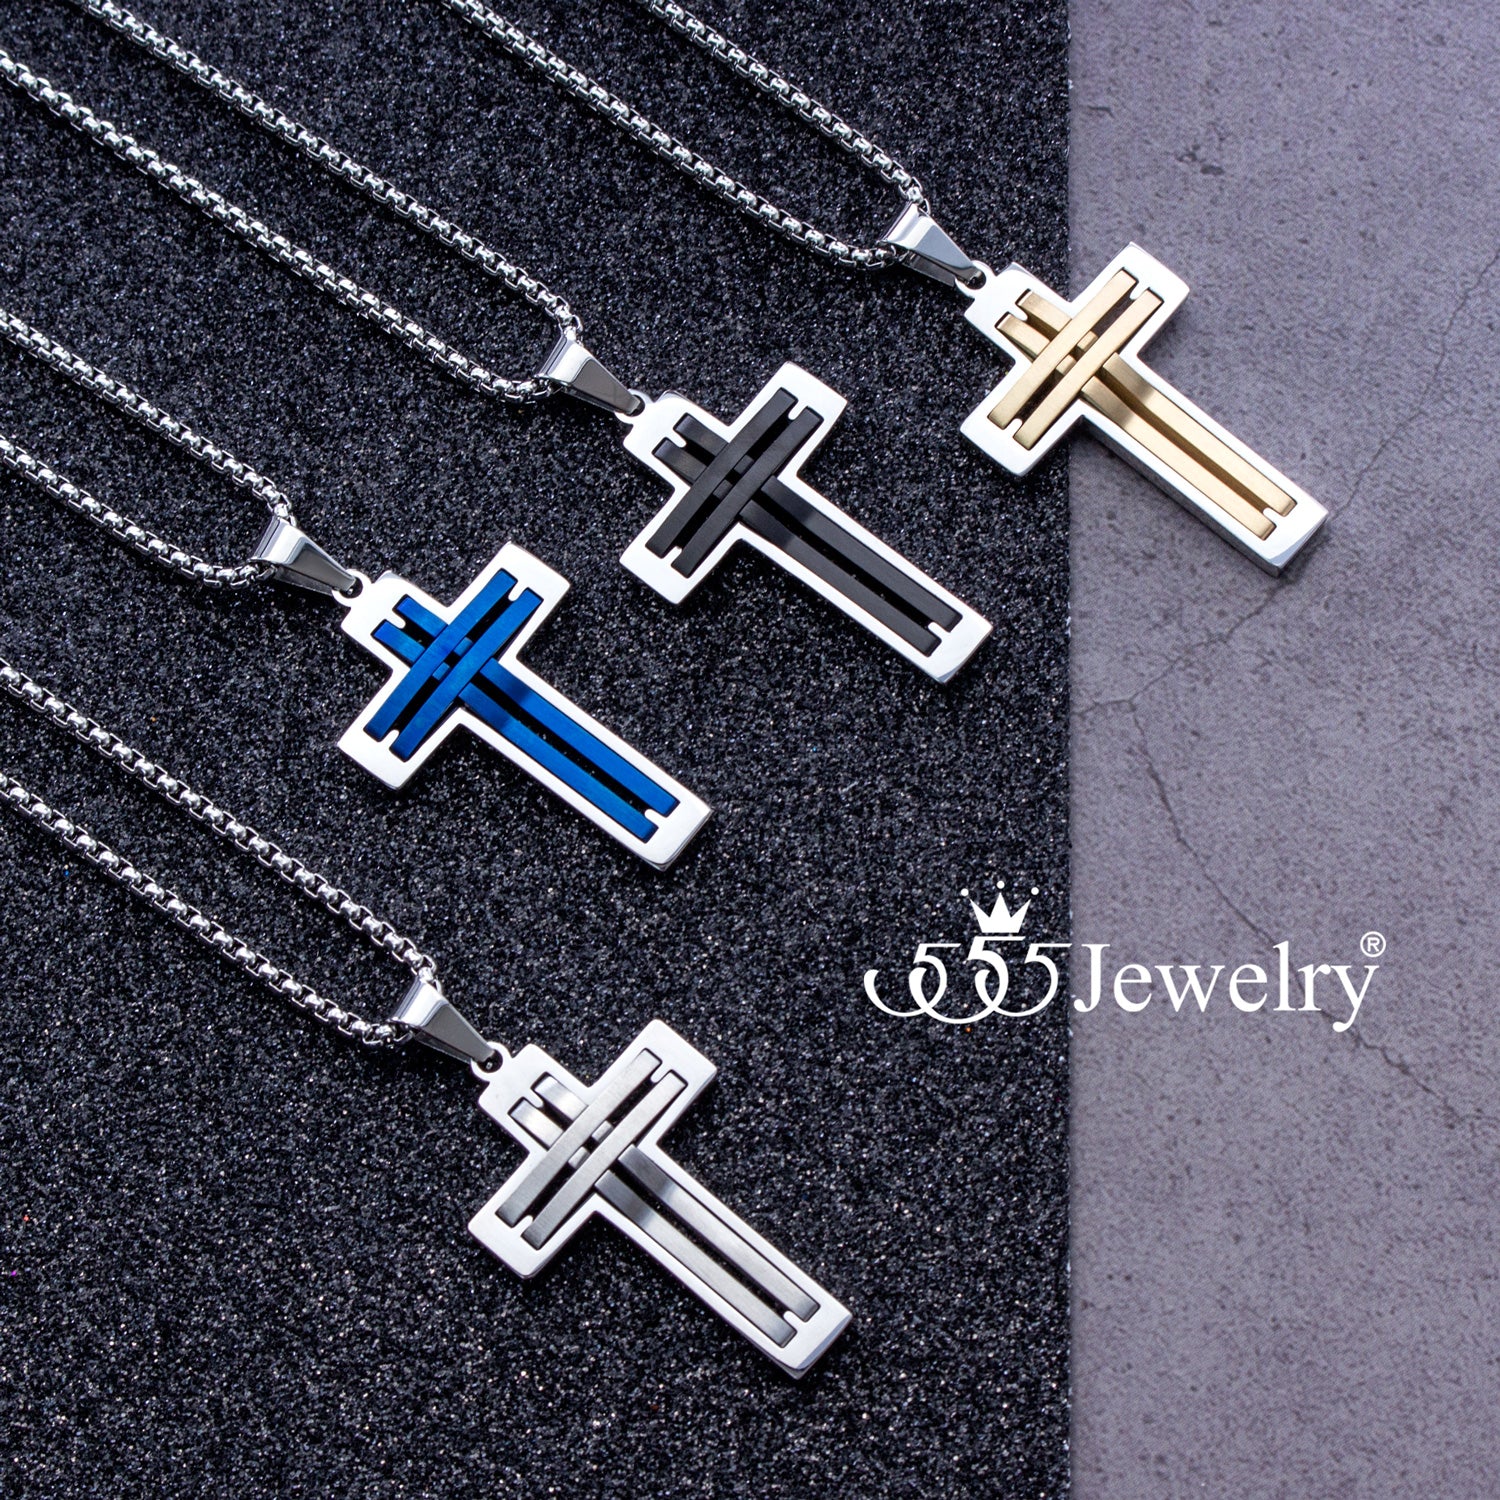 1/2Pcs Vintage Cross Pendant Necklace Stainless Steel Necklace New Design  Black Silver Gold Colors Chain Pendant Necklace Stonego Men Women Necklace  | Wish